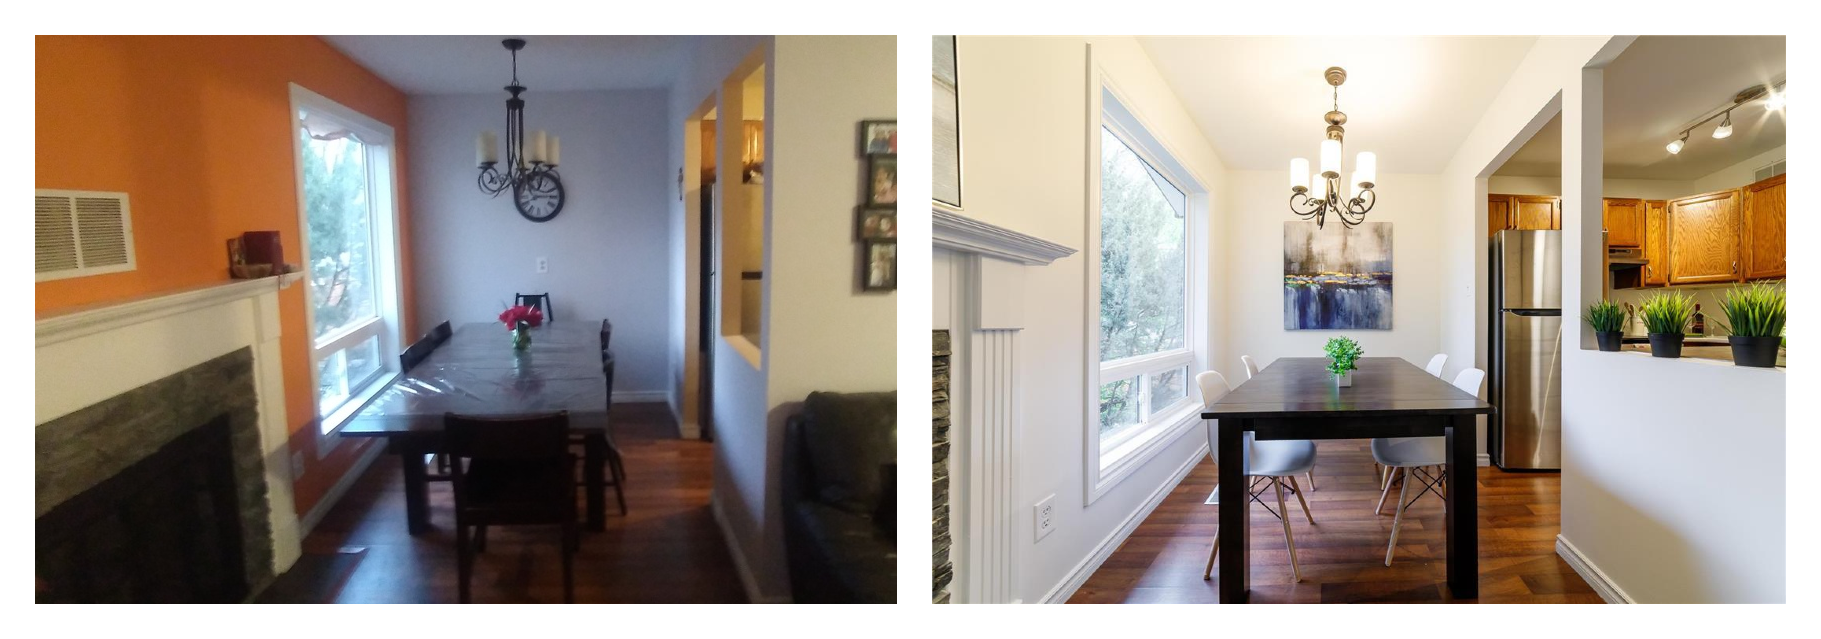 Before and After Home Staging